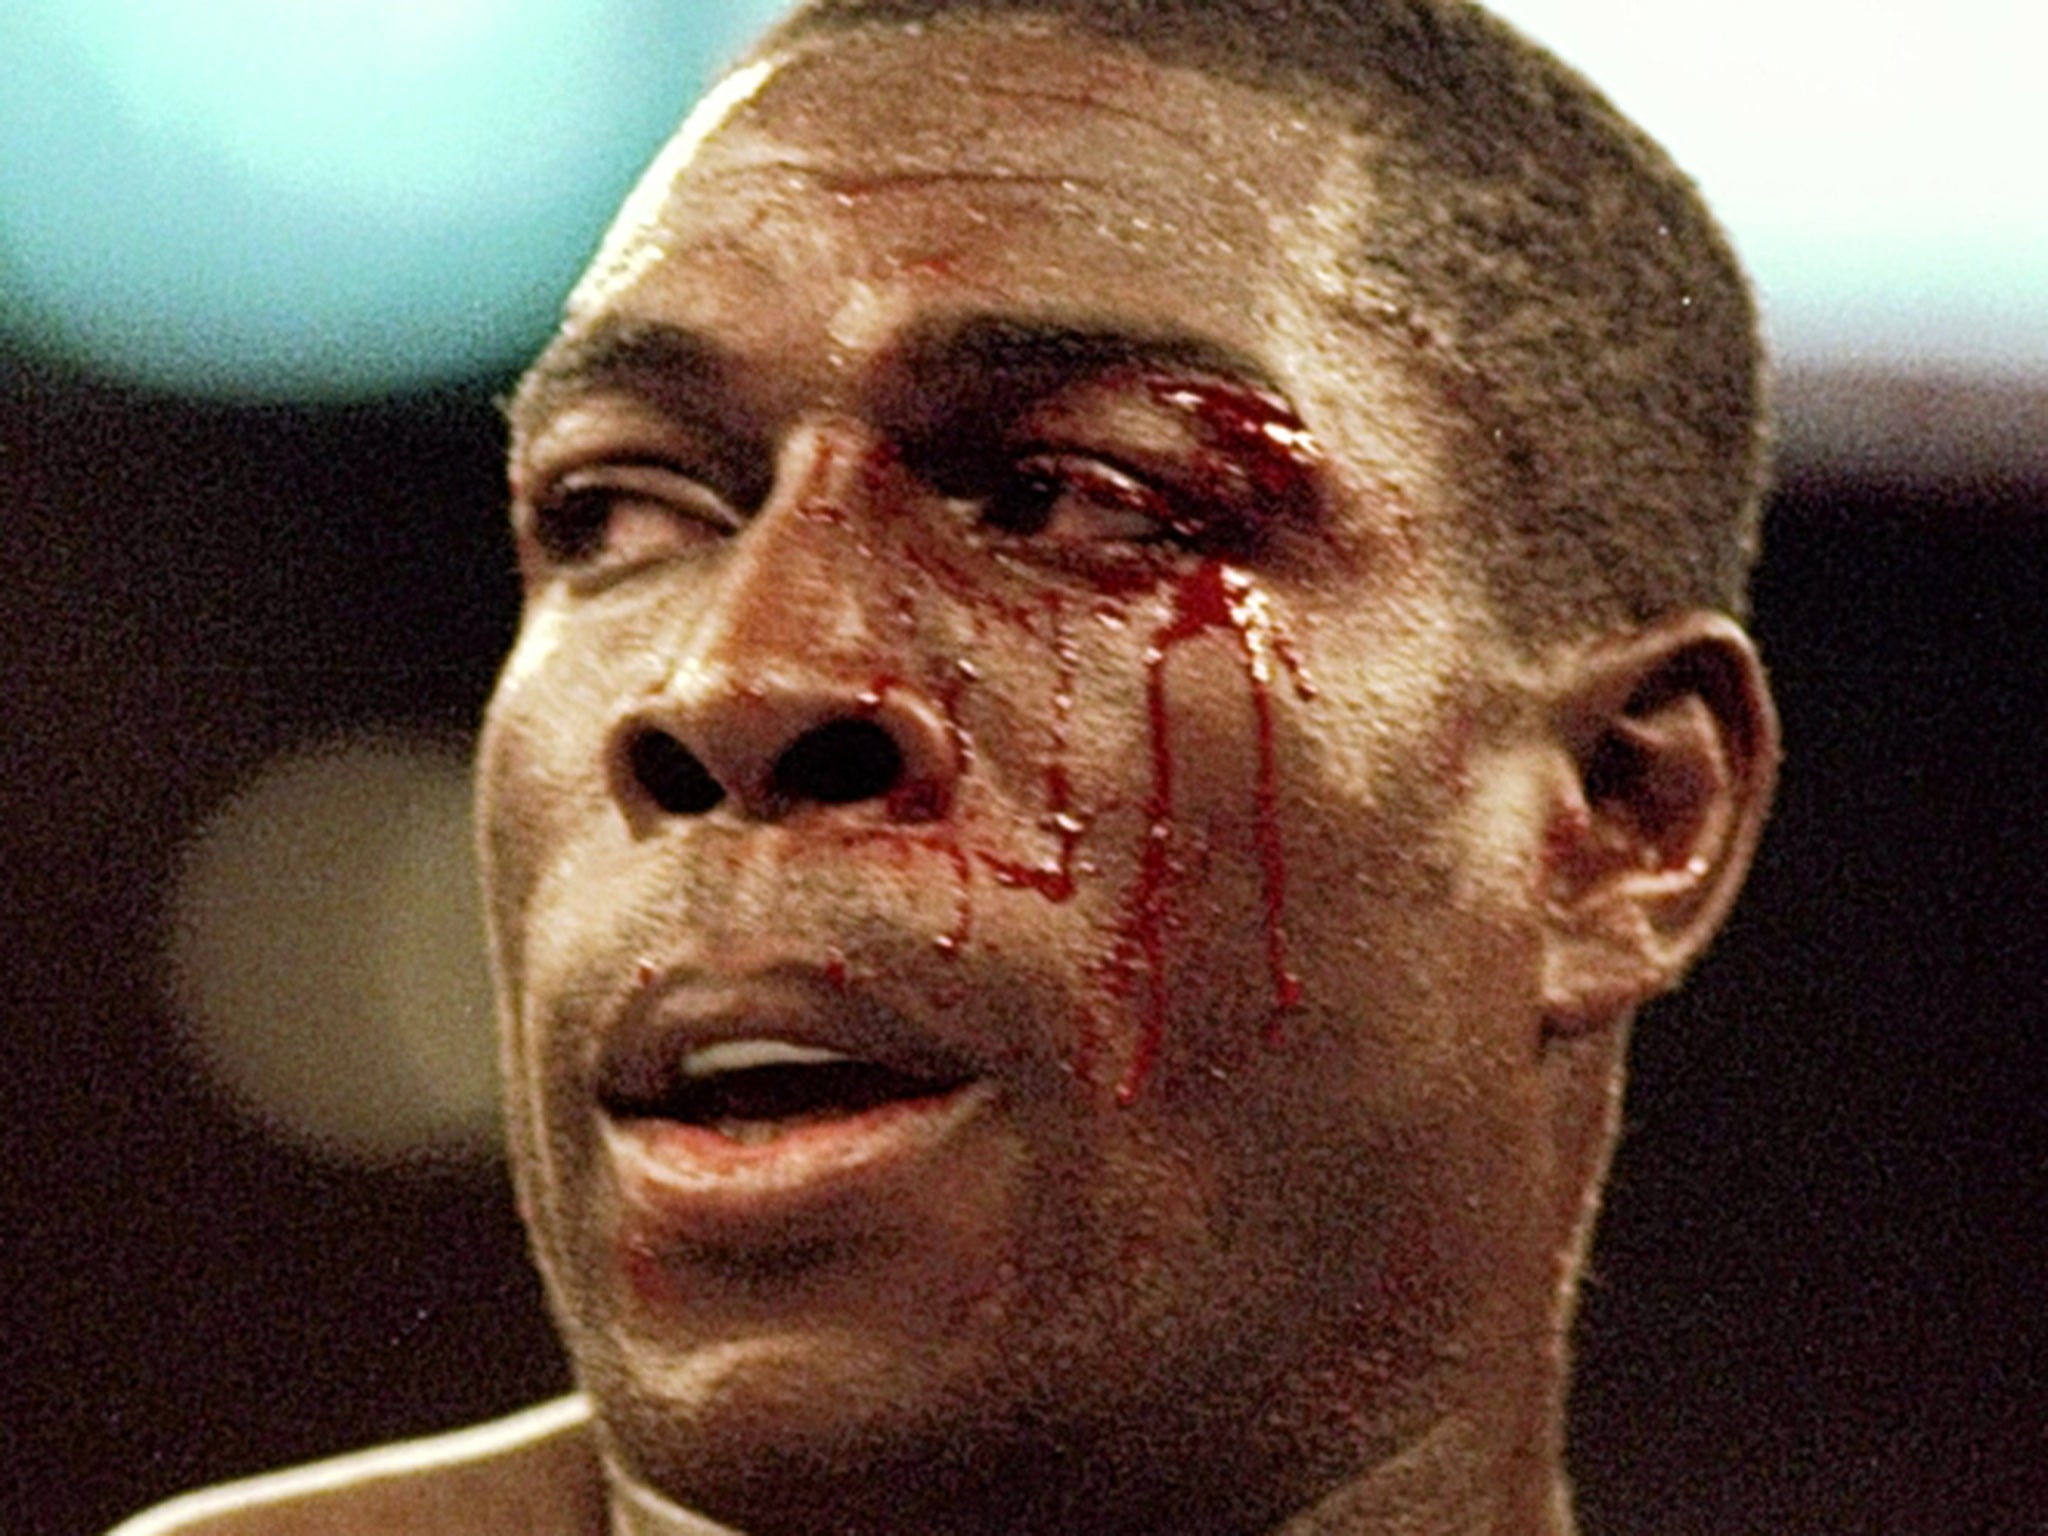 Frank Bruno after his last fight against Mike Tyson in 1996